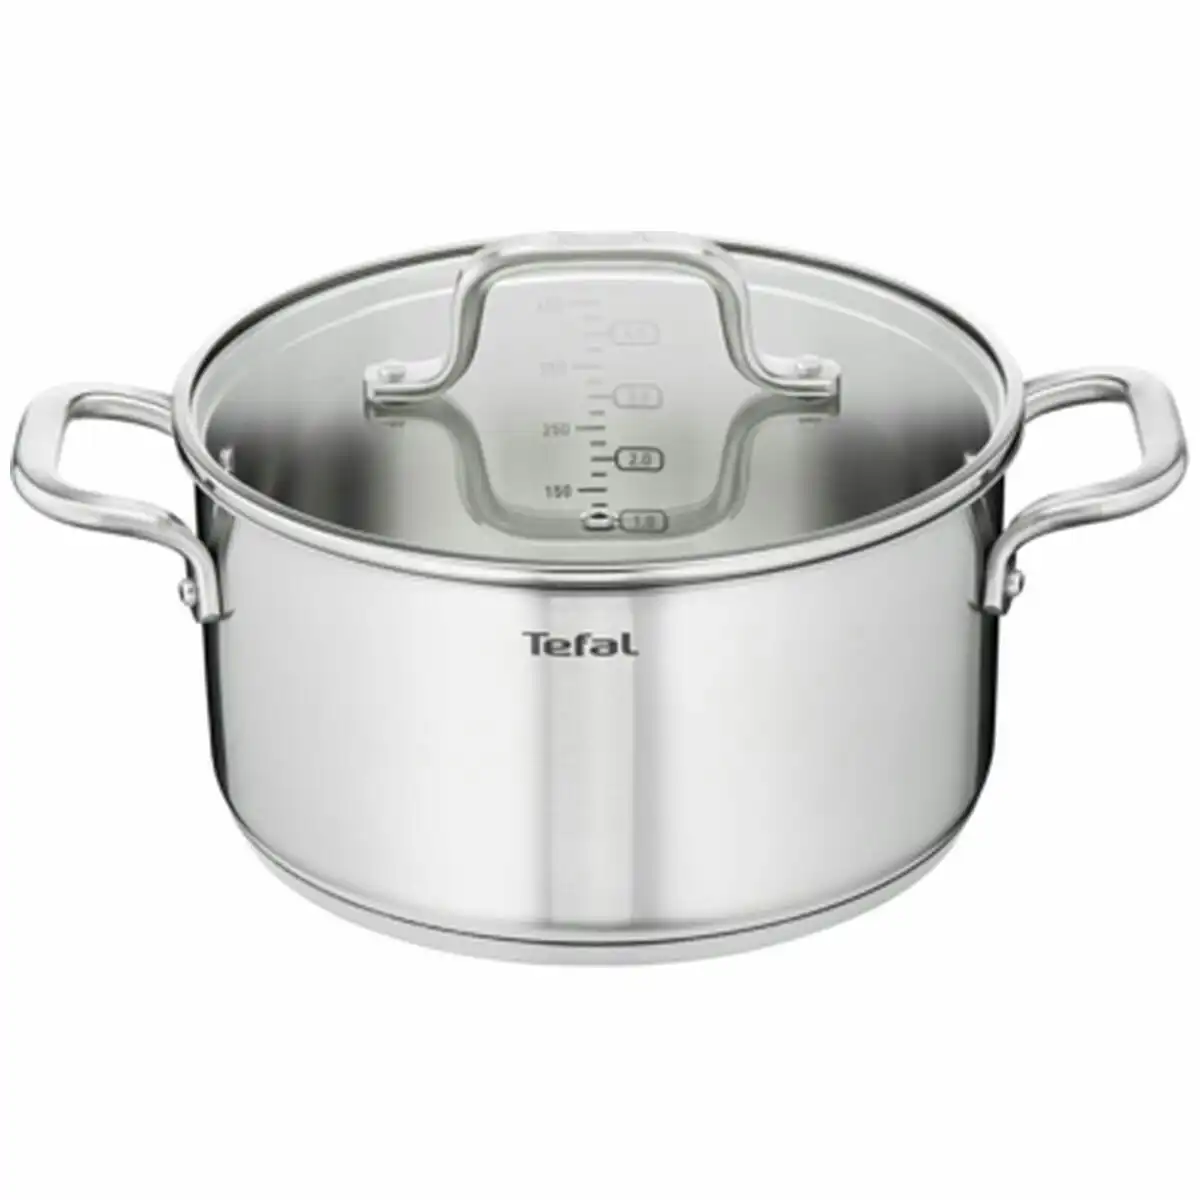 Tefal 20cm Virtuoso Stainless Steel Induction Stewpot